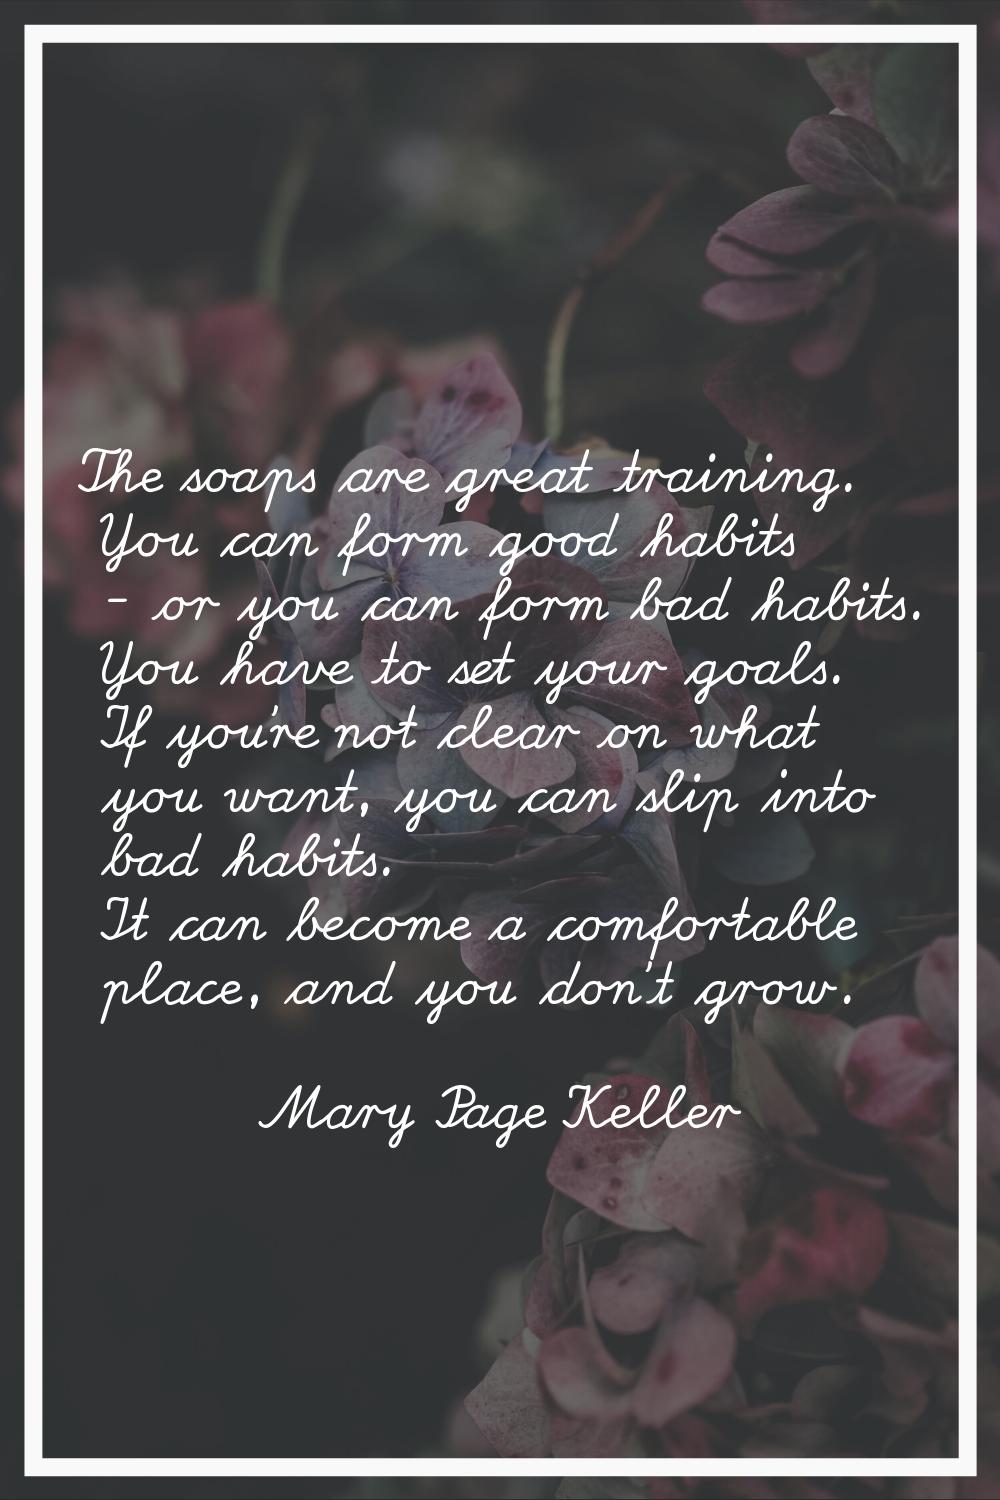 The soaps are great training. You can form good habits - or you can form bad habits. You have to se